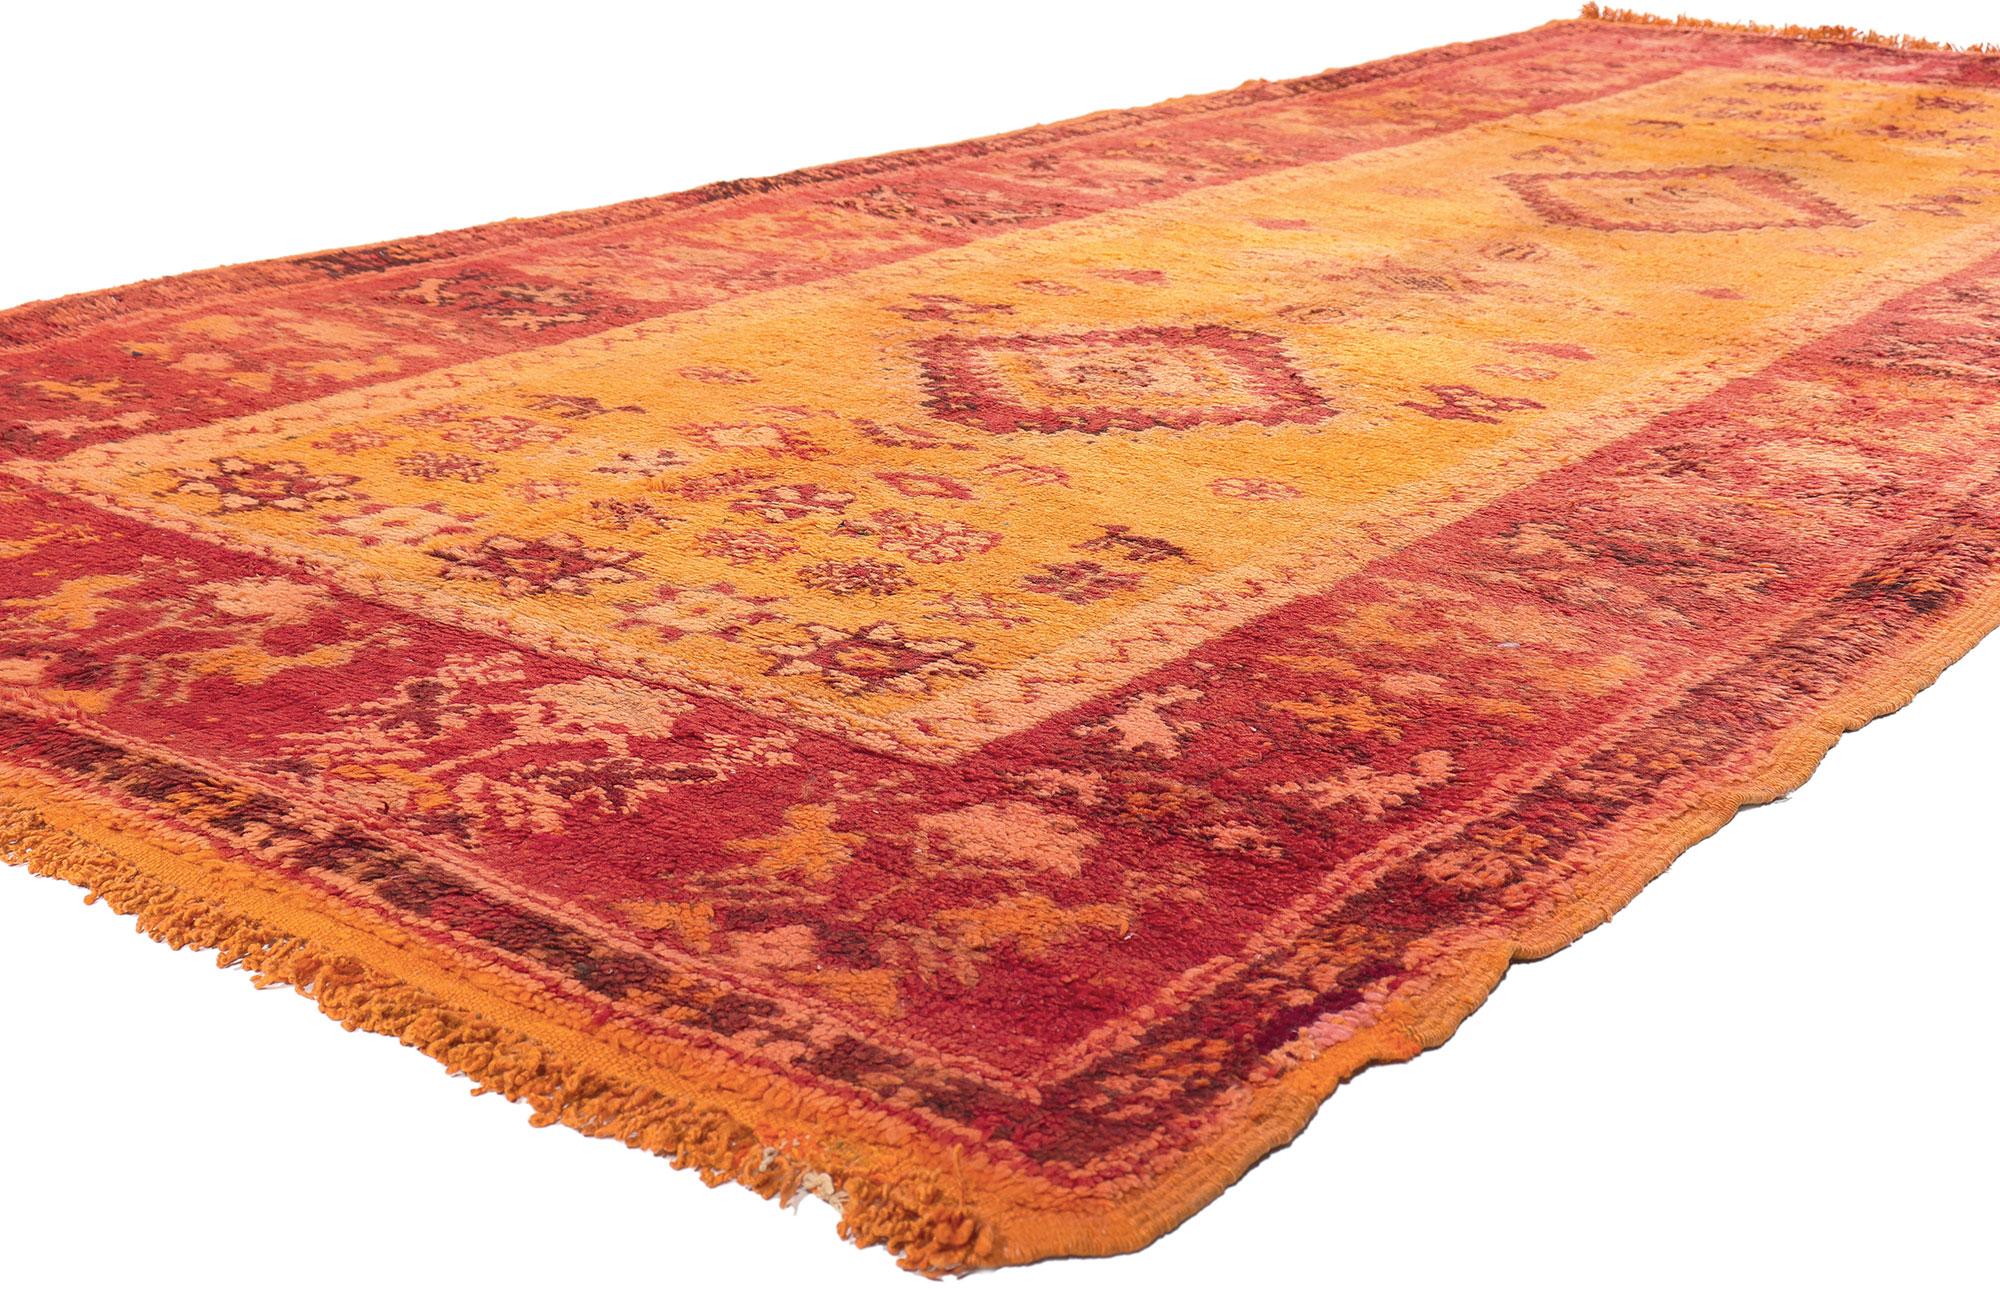 20206 Vintage Orange Taznakht Moroccan Rug, 05'07 x 13'01.

Transport yourself to the sun-soaked landscapes of the Mediterranean with this exquisite hand-knotted wool vintage Taznakht Moroccan rug. Embracing the warmth of earthy tones, this Moroccan